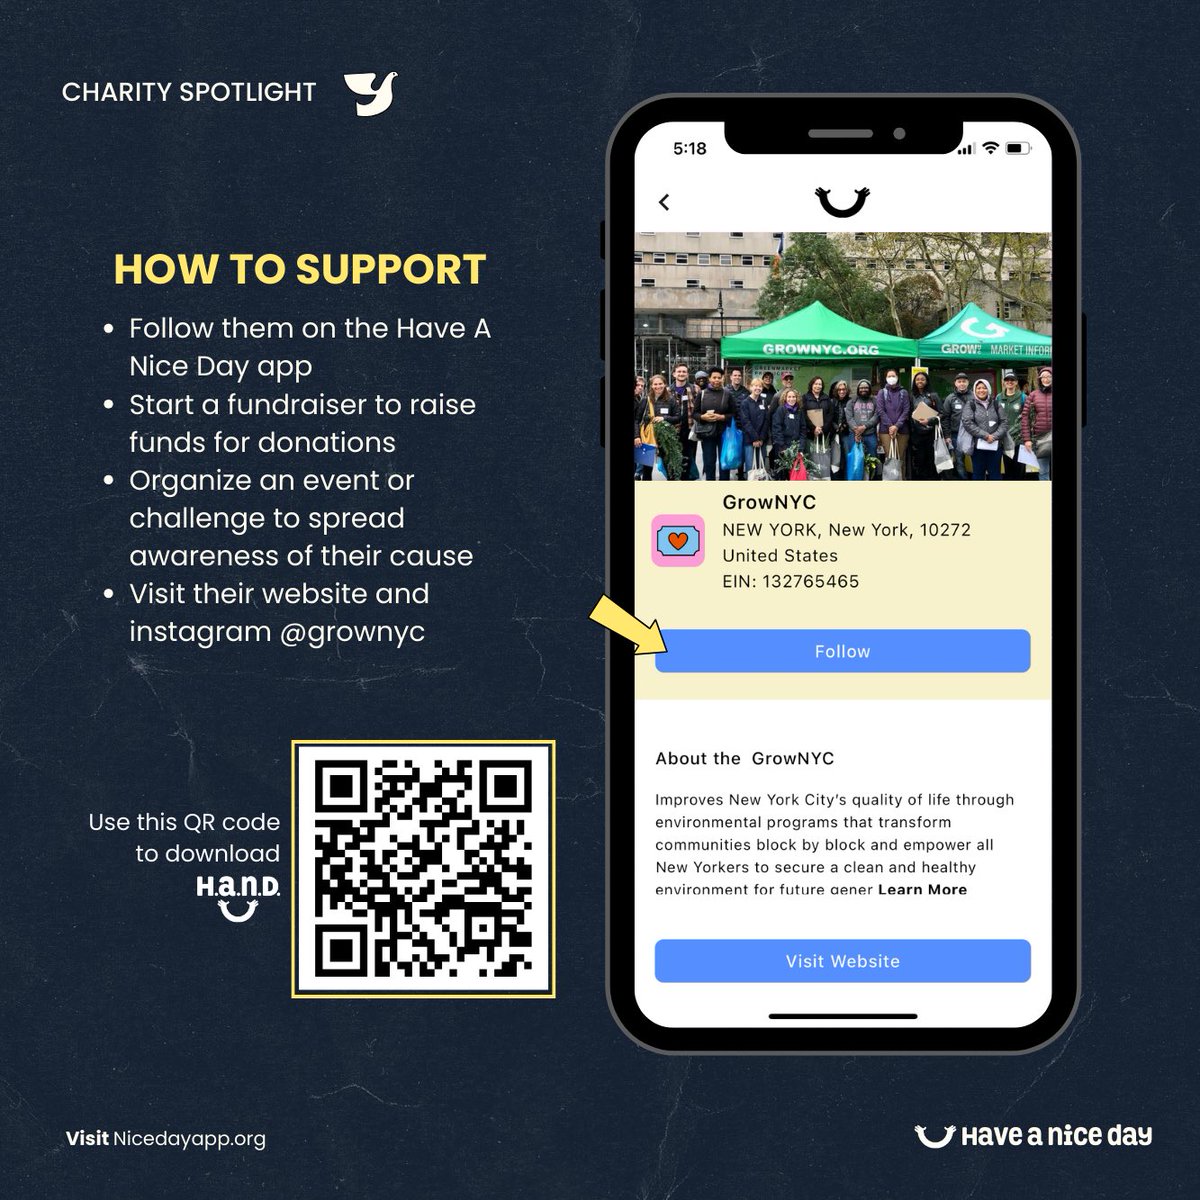 You can support GrowNYC today through the Have A Nice Day app, now available for free on the App Store 👏